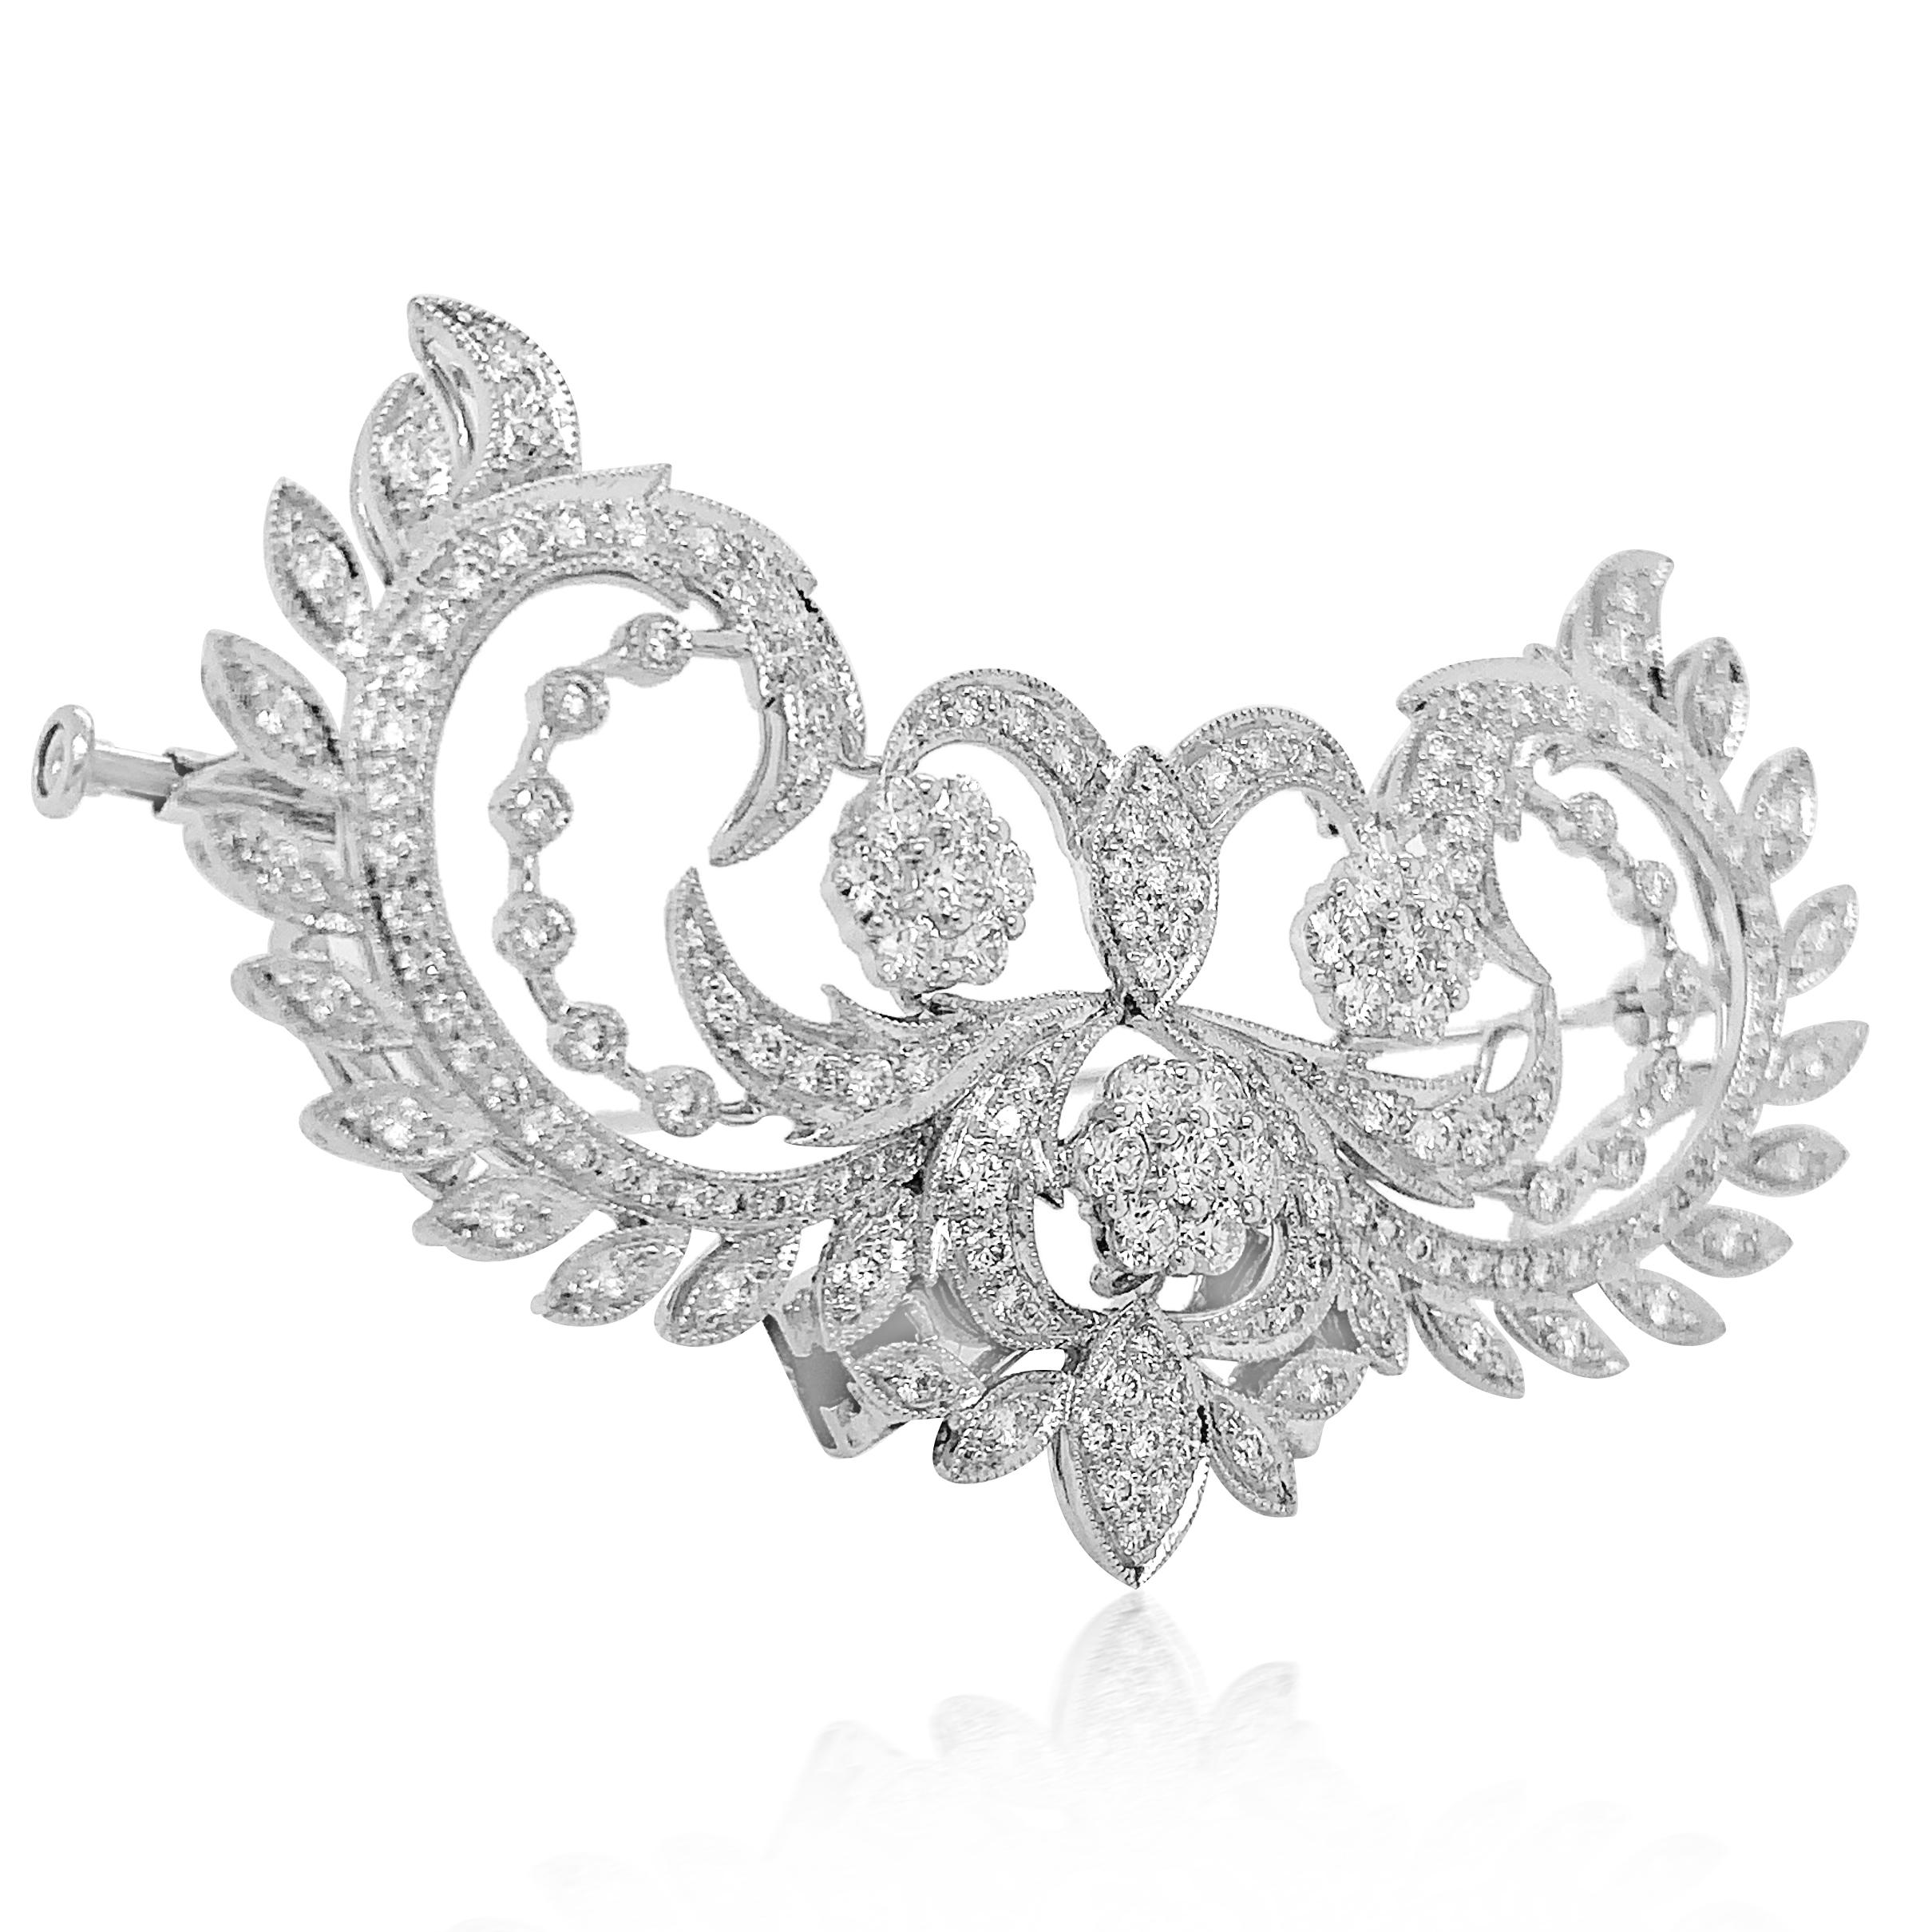 This breathtaking floral motif diamond brooch/pendant is crafted in solid 18K white gold, weighing  18.48 grams and measuring 65x40mm. It is centered with three 5-petal flowers composed of six 0.04-carat round-cut diamonds. Further enhanced with